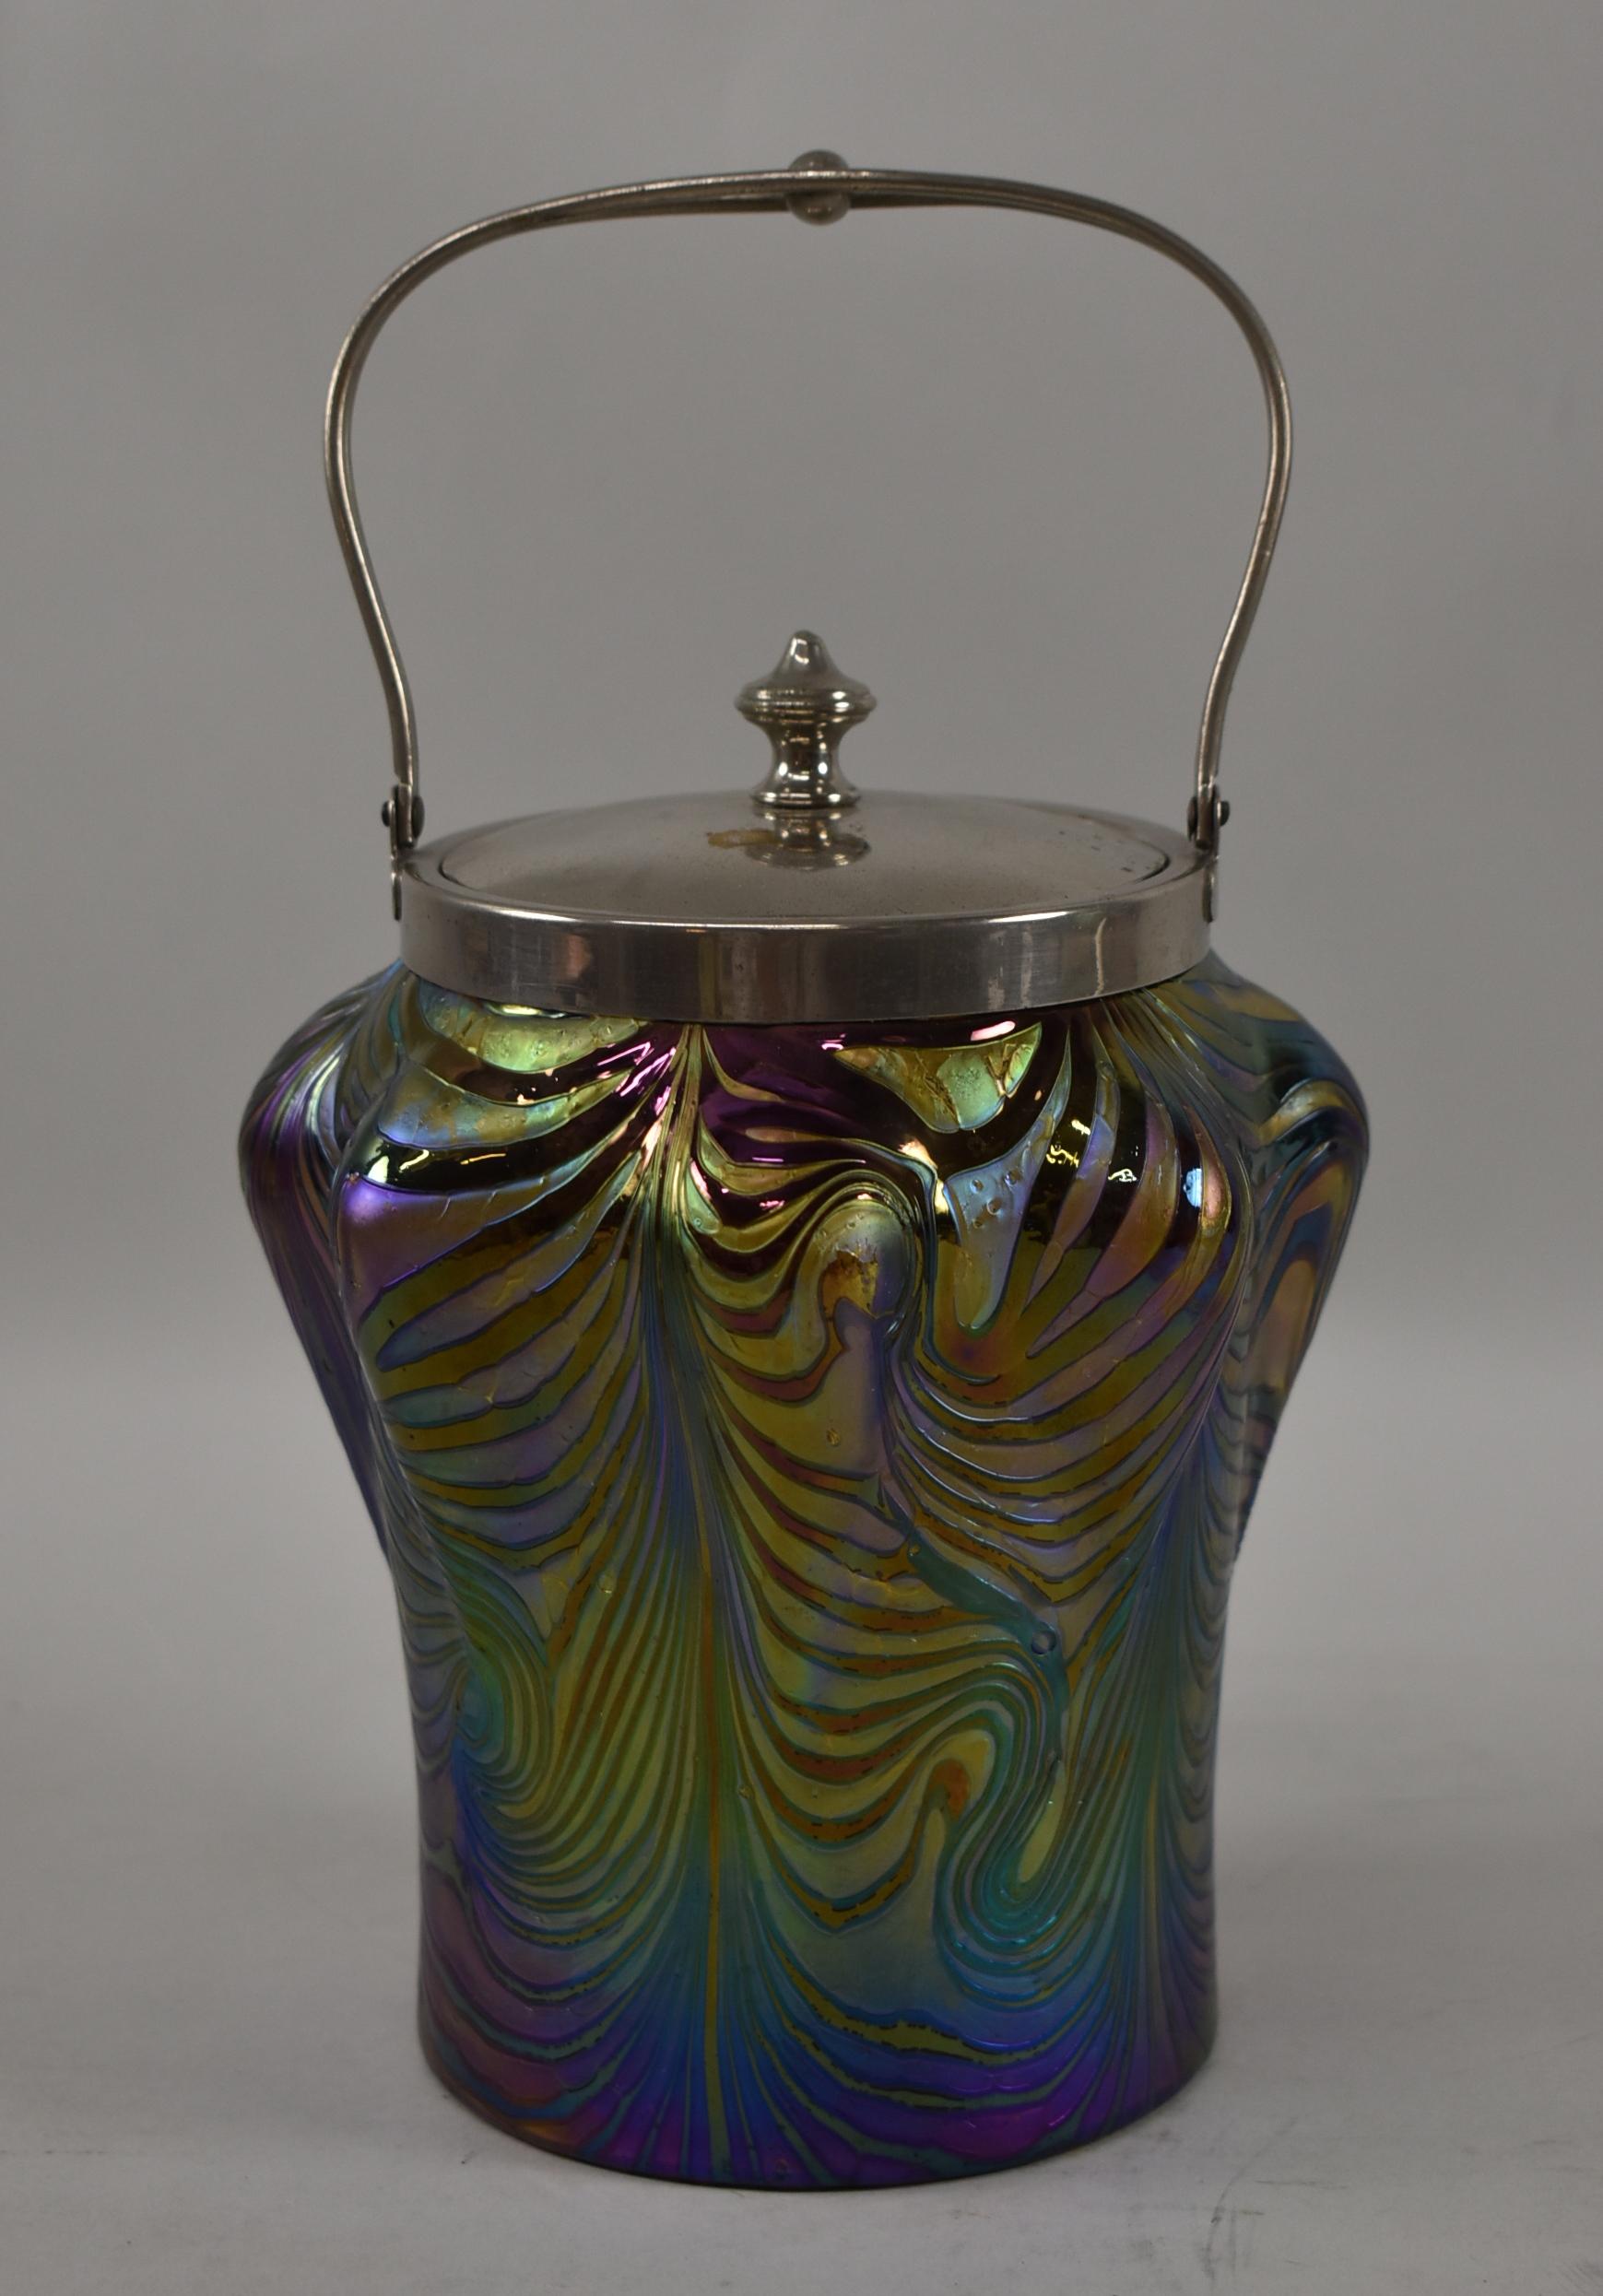 Austrian art glass biscuit jar in iridescent shades of purple, blue, green and gold. Lid and handle are silver plated. Beautiful swirl design. Very nice condition. Measures: 9 3/4